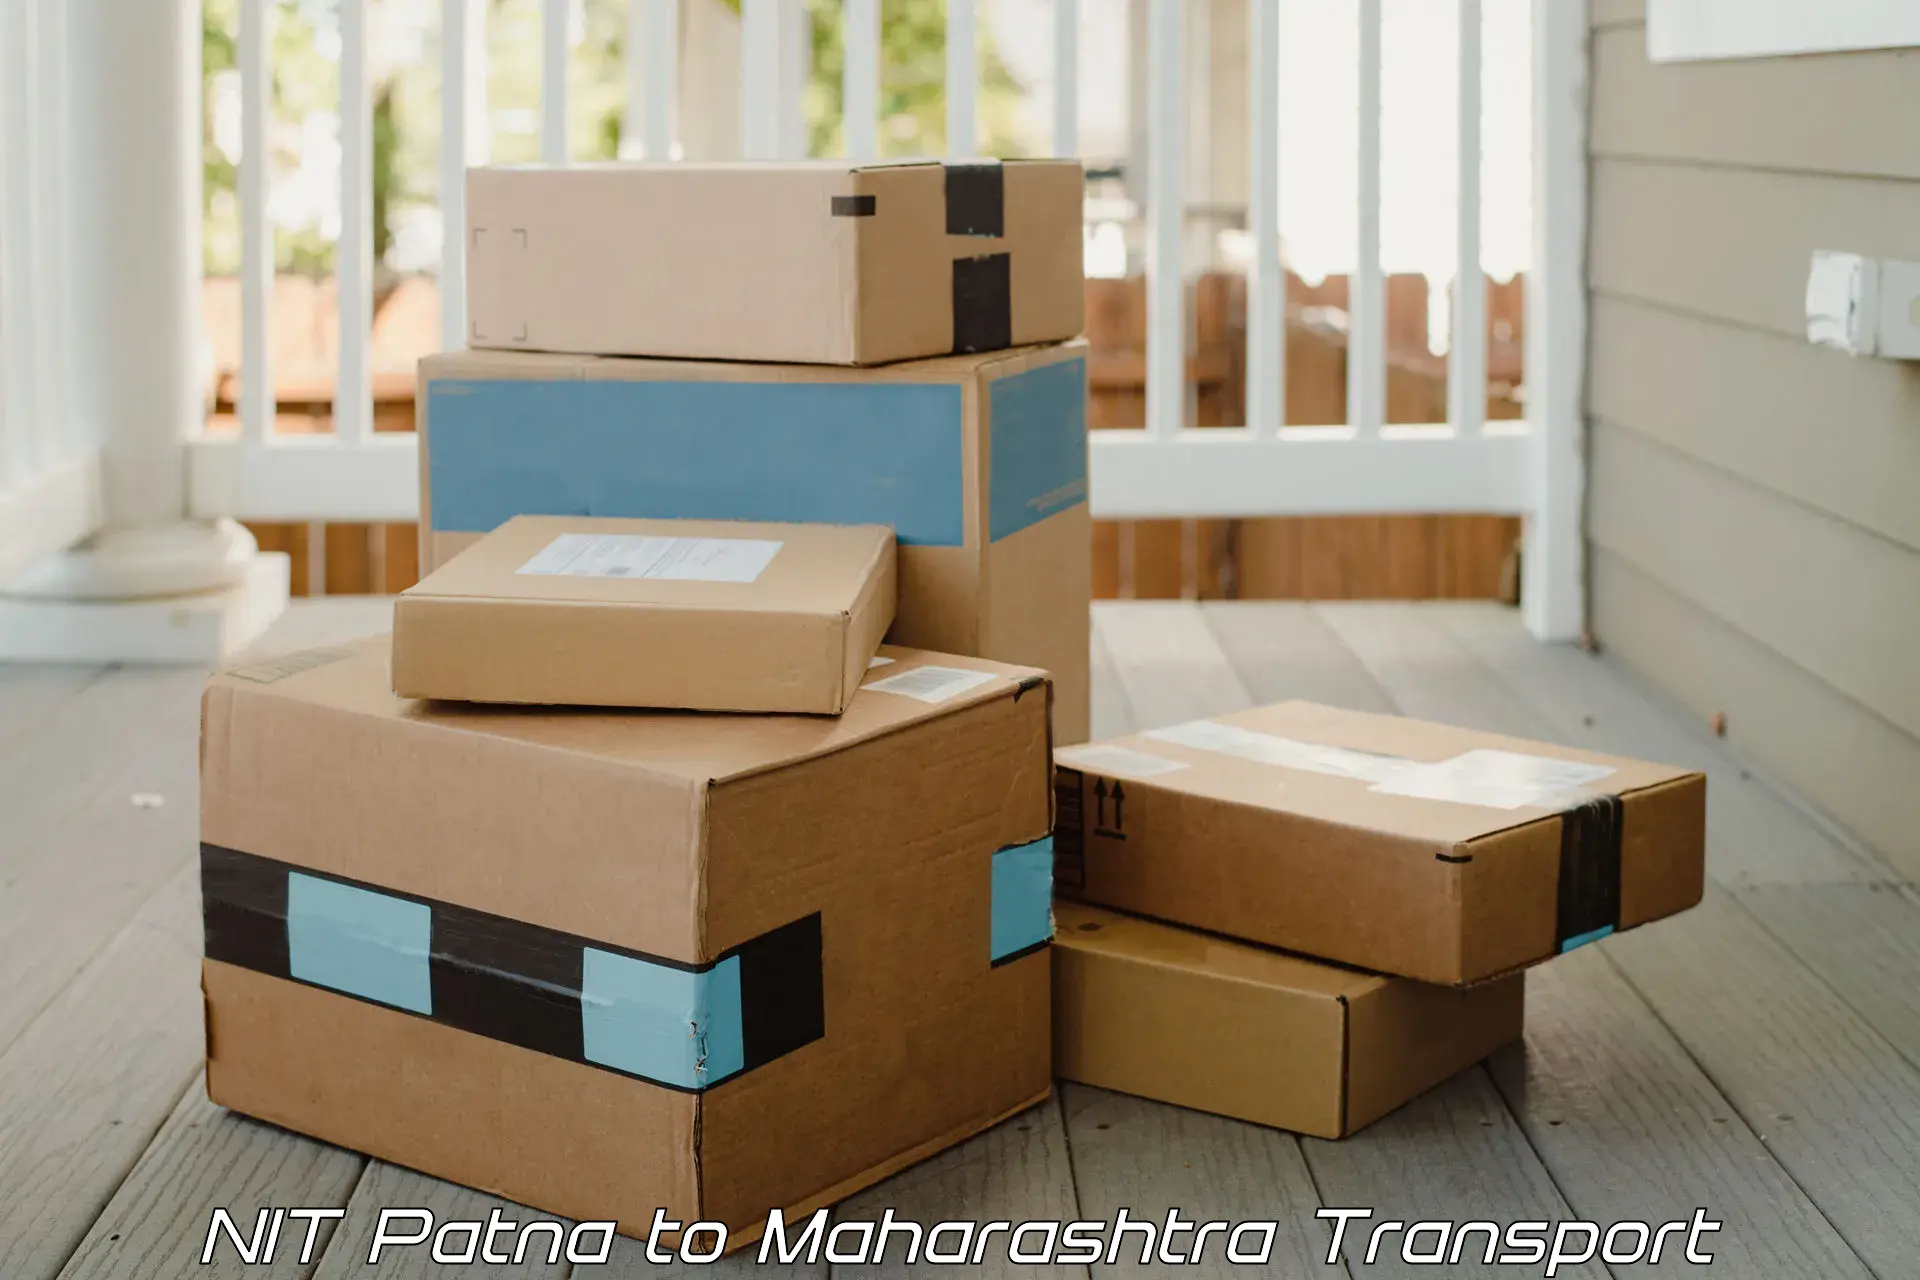 Domestic goods transportation services NIT Patna to Hinganghat